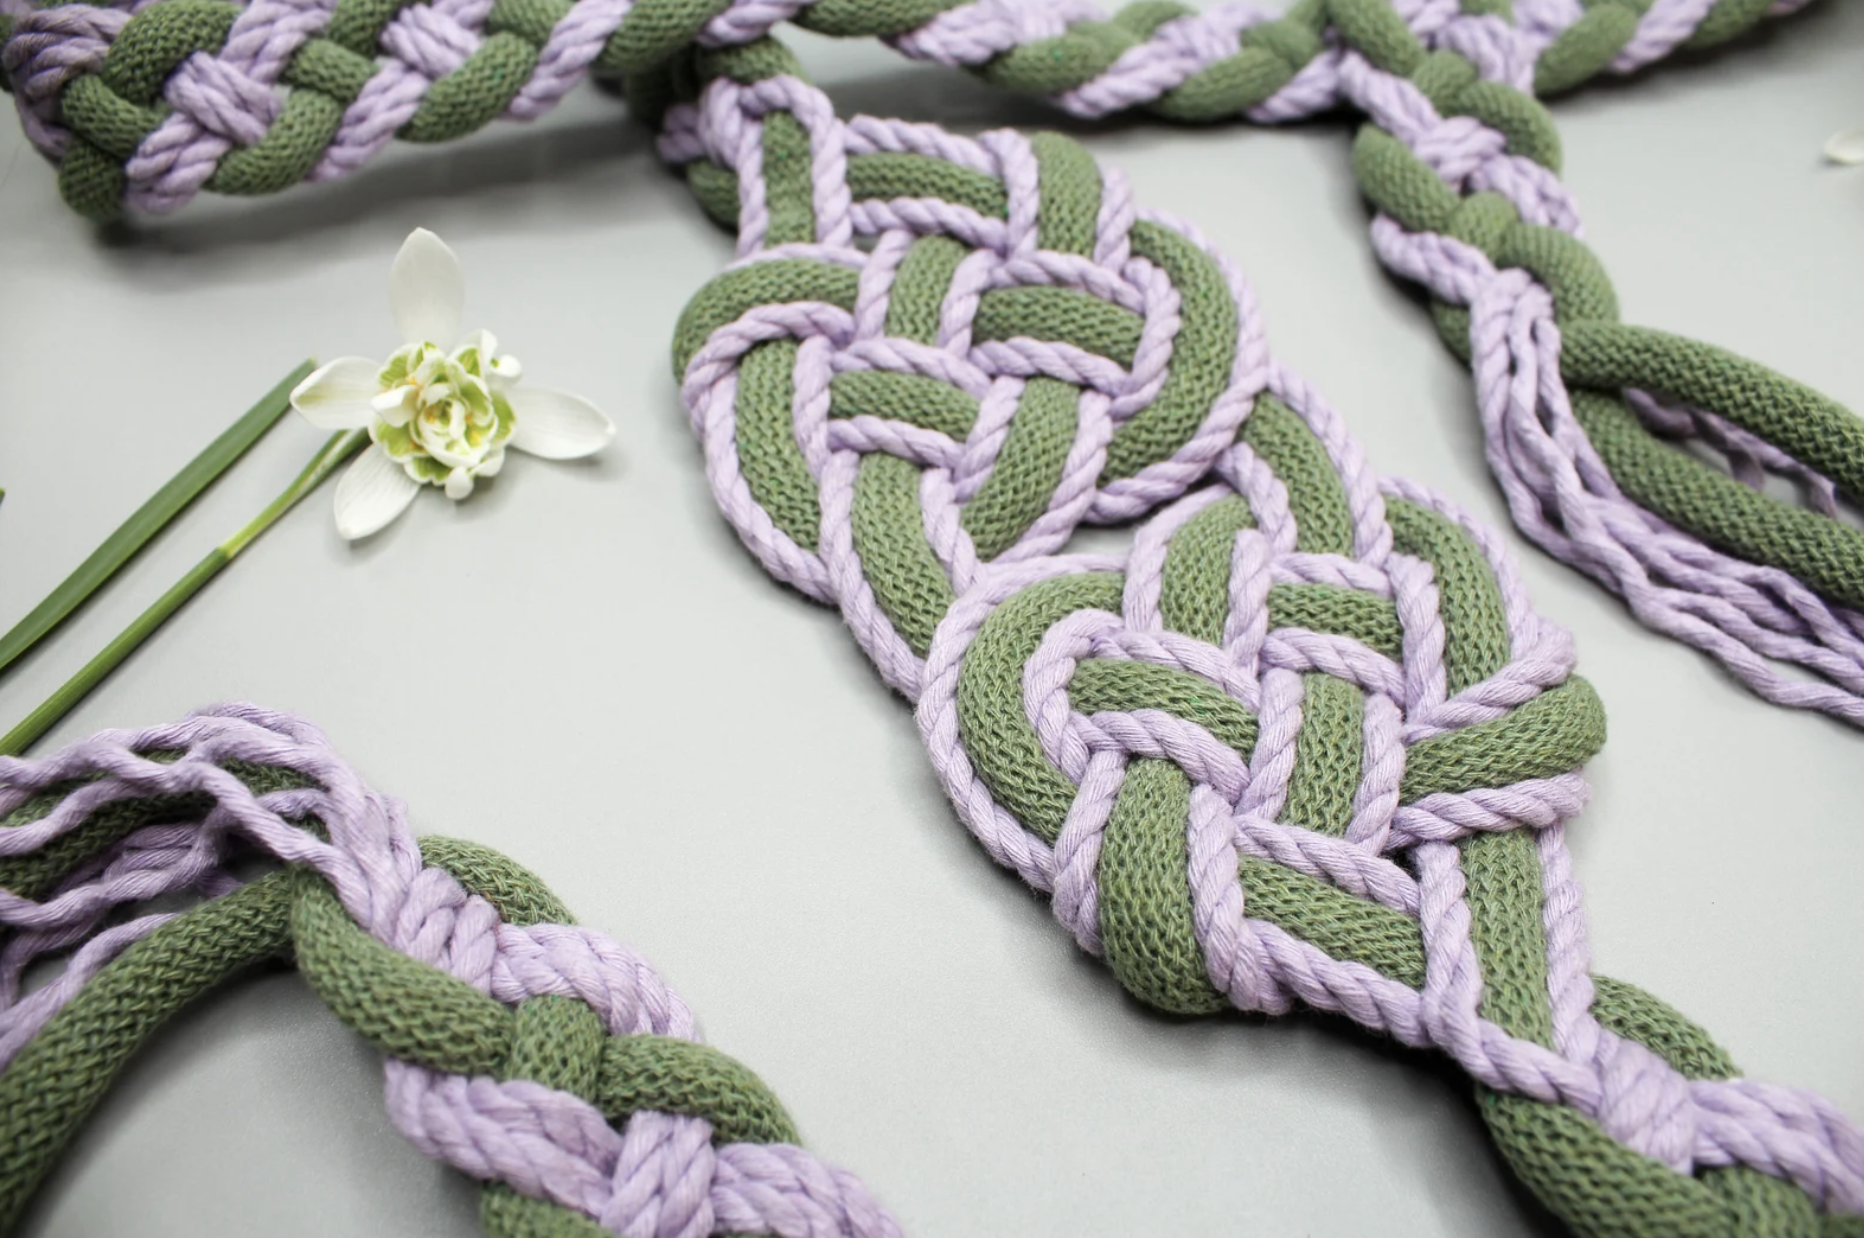 Meaning and symbolism of handfasting knots — Ceotha - handfasting